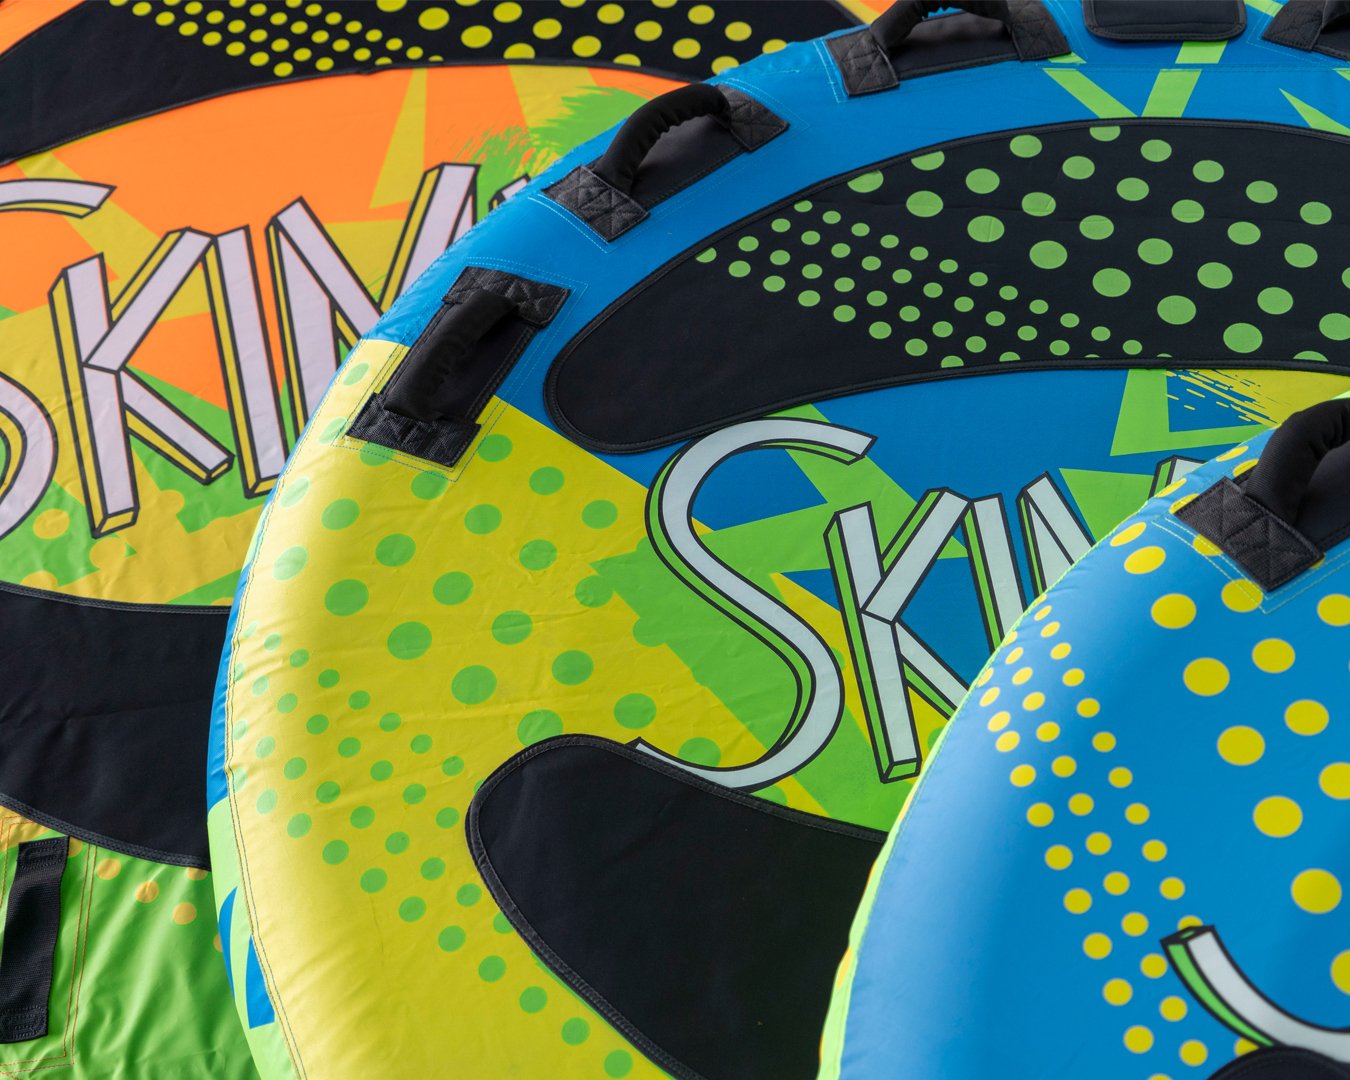 How many riders are you bringing along? These skimmers might just be perfect for your crew! 😉

Skimmer 60 - 1️⃣ Rider
Skimmer 70 - 2️⃣ Riders
Skimmer 80 - 3️⃣ Riders

#WhiteKnuckle #watertoys #watersports #summer #cottage #camp #fun #waterski #towab